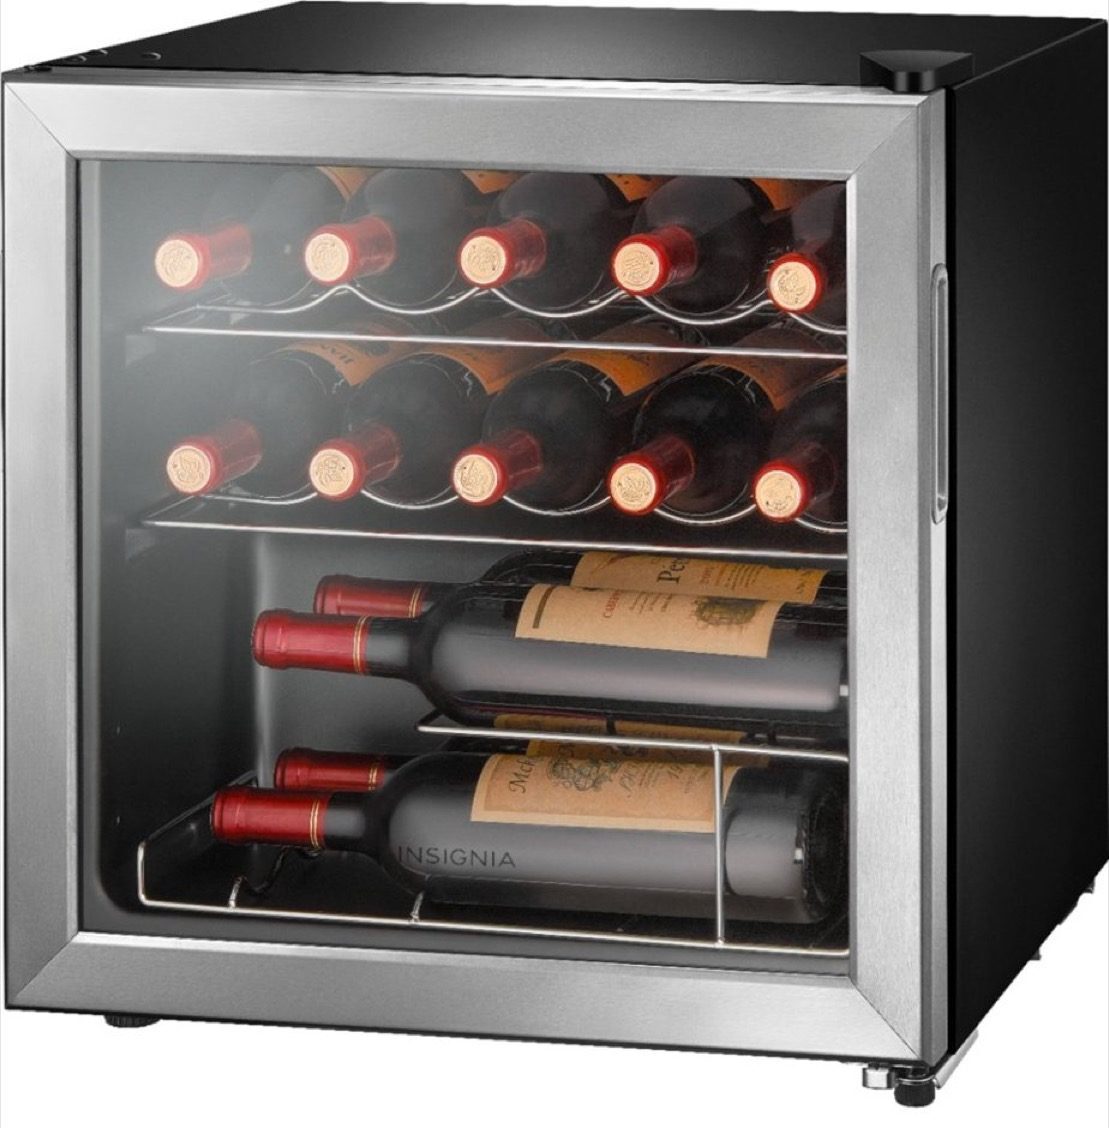 Insignia Wine Cooler {Cheap Items From Best Buy}